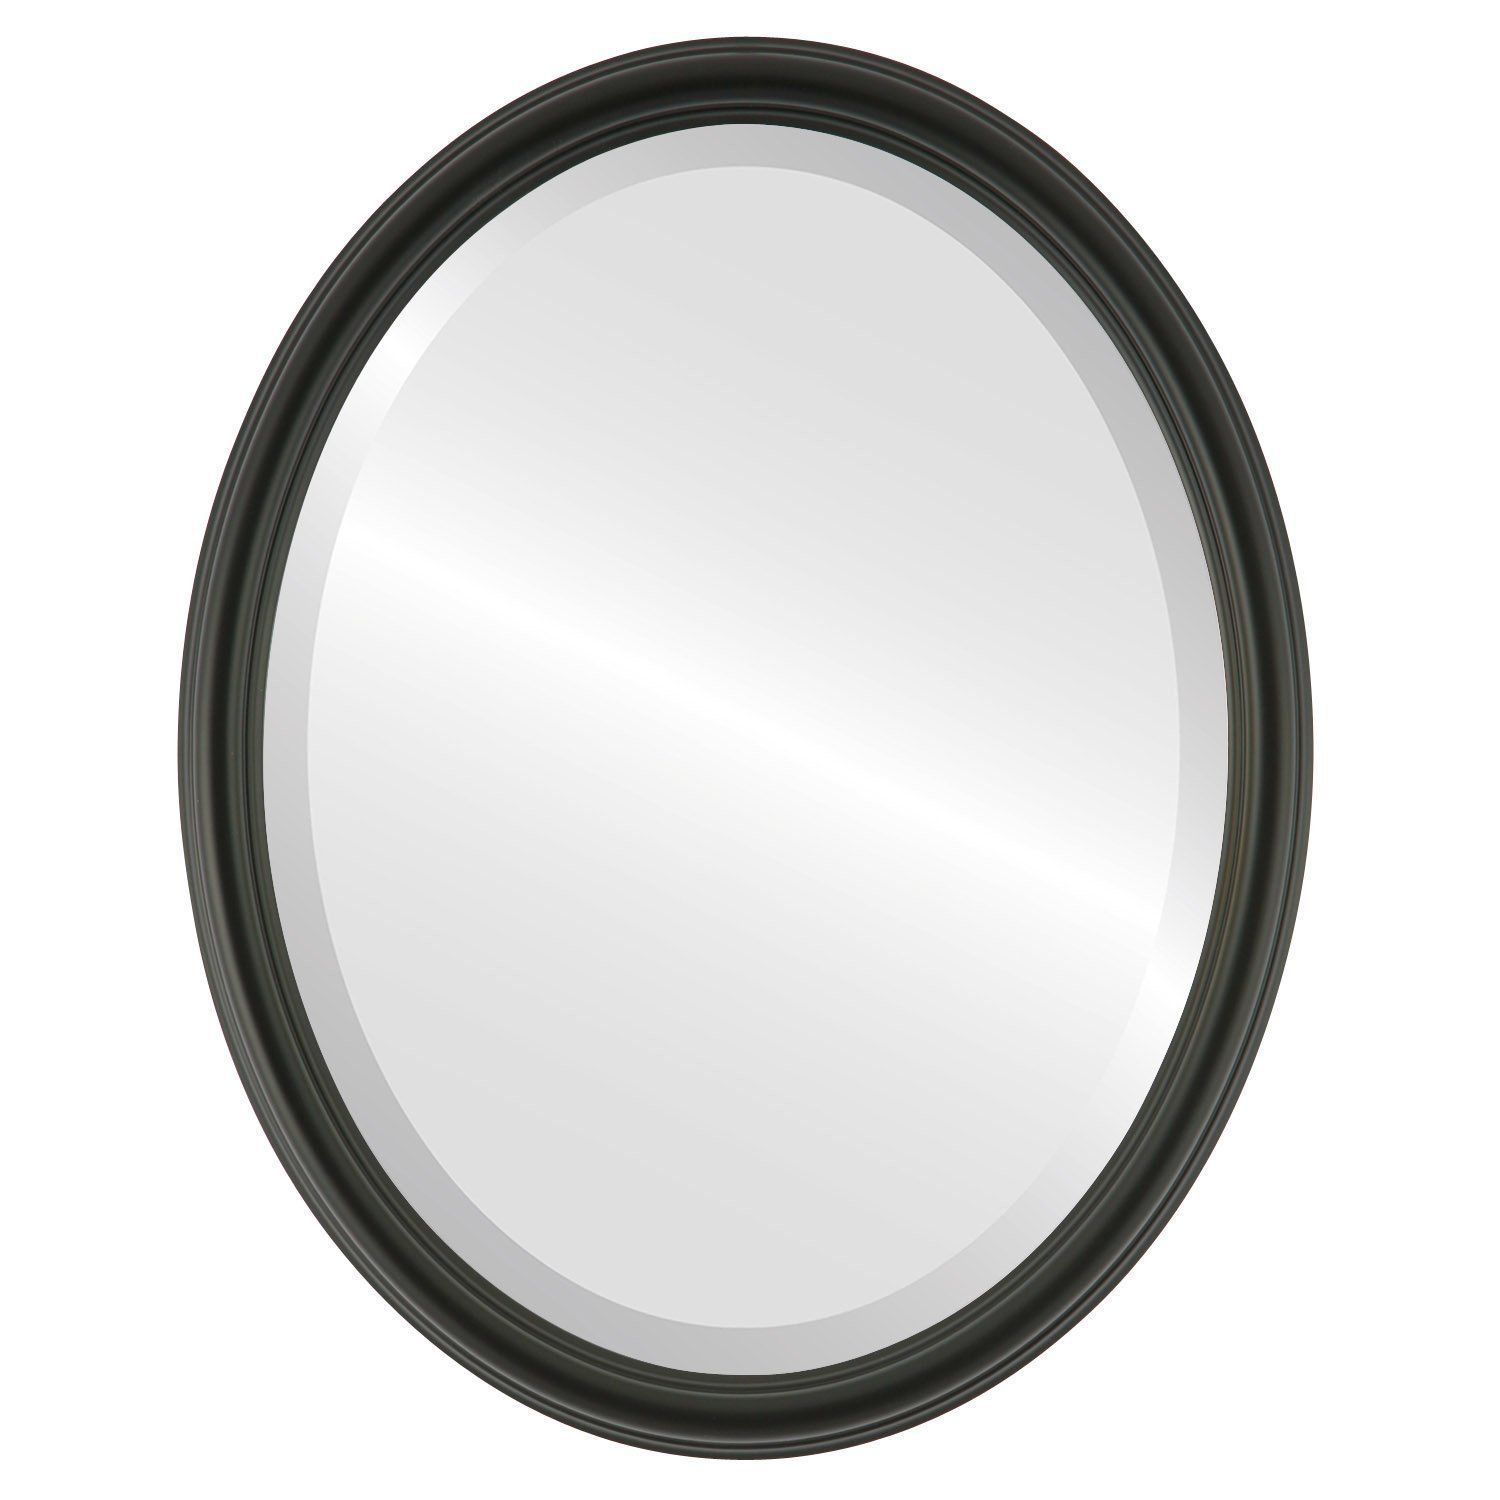 Saratoga Oval In Matte Black >>> Check Out The Imagevisiting The Intended For Framed Matte Black Square Wall Mirrors (View 1 of 15)